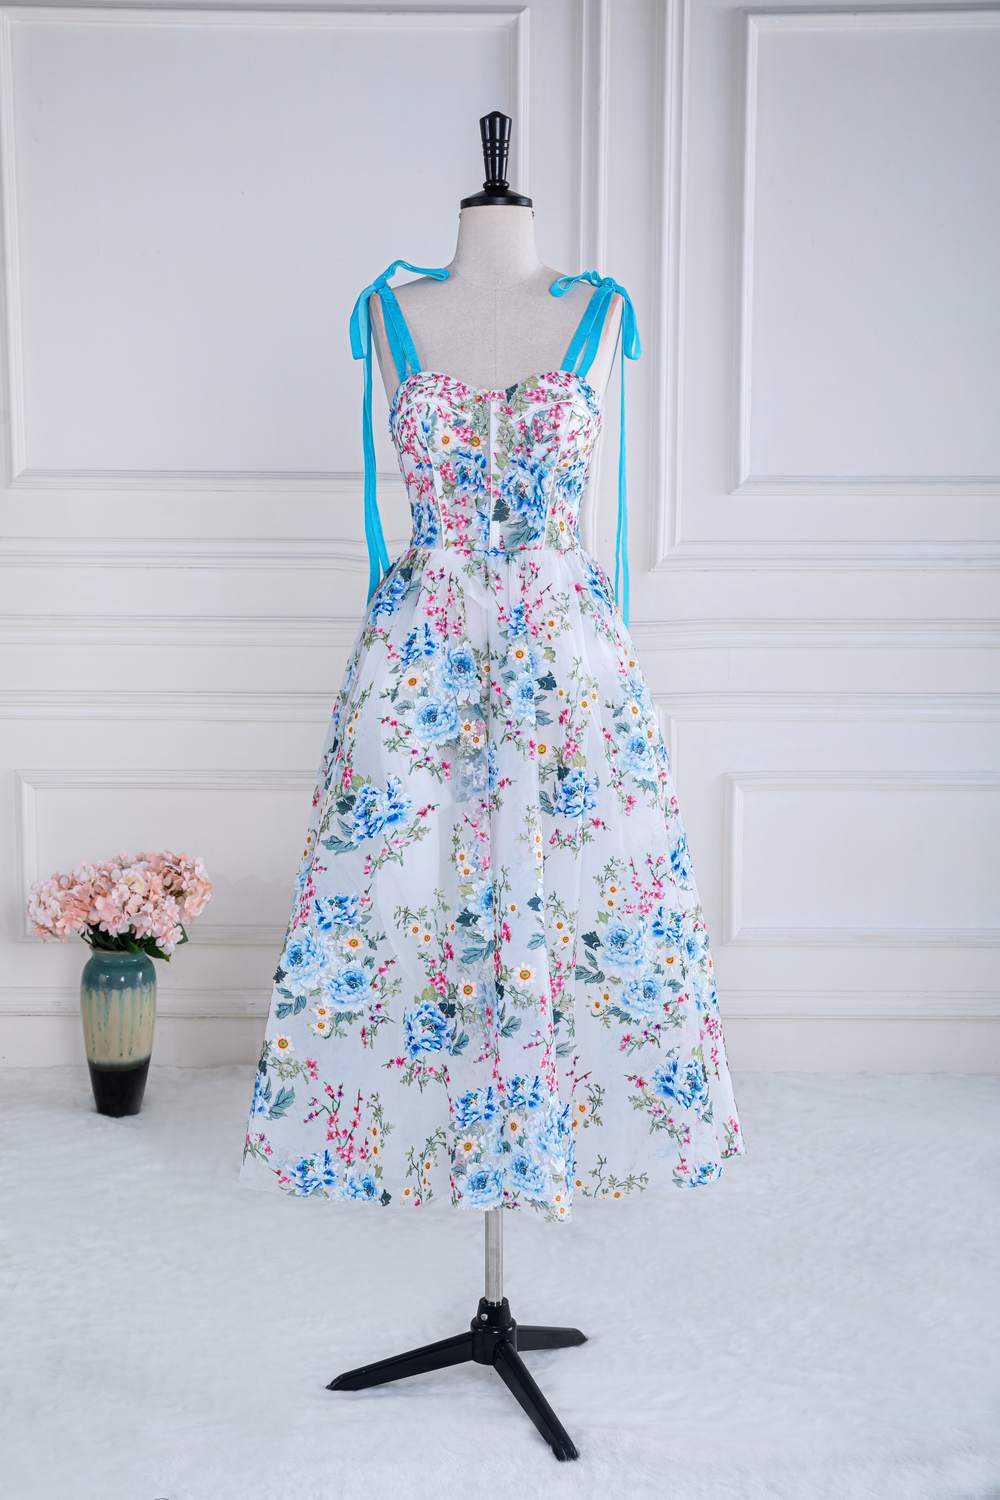 Blue and White Bow Tie Straps Floral Tea-Length Prom Dress